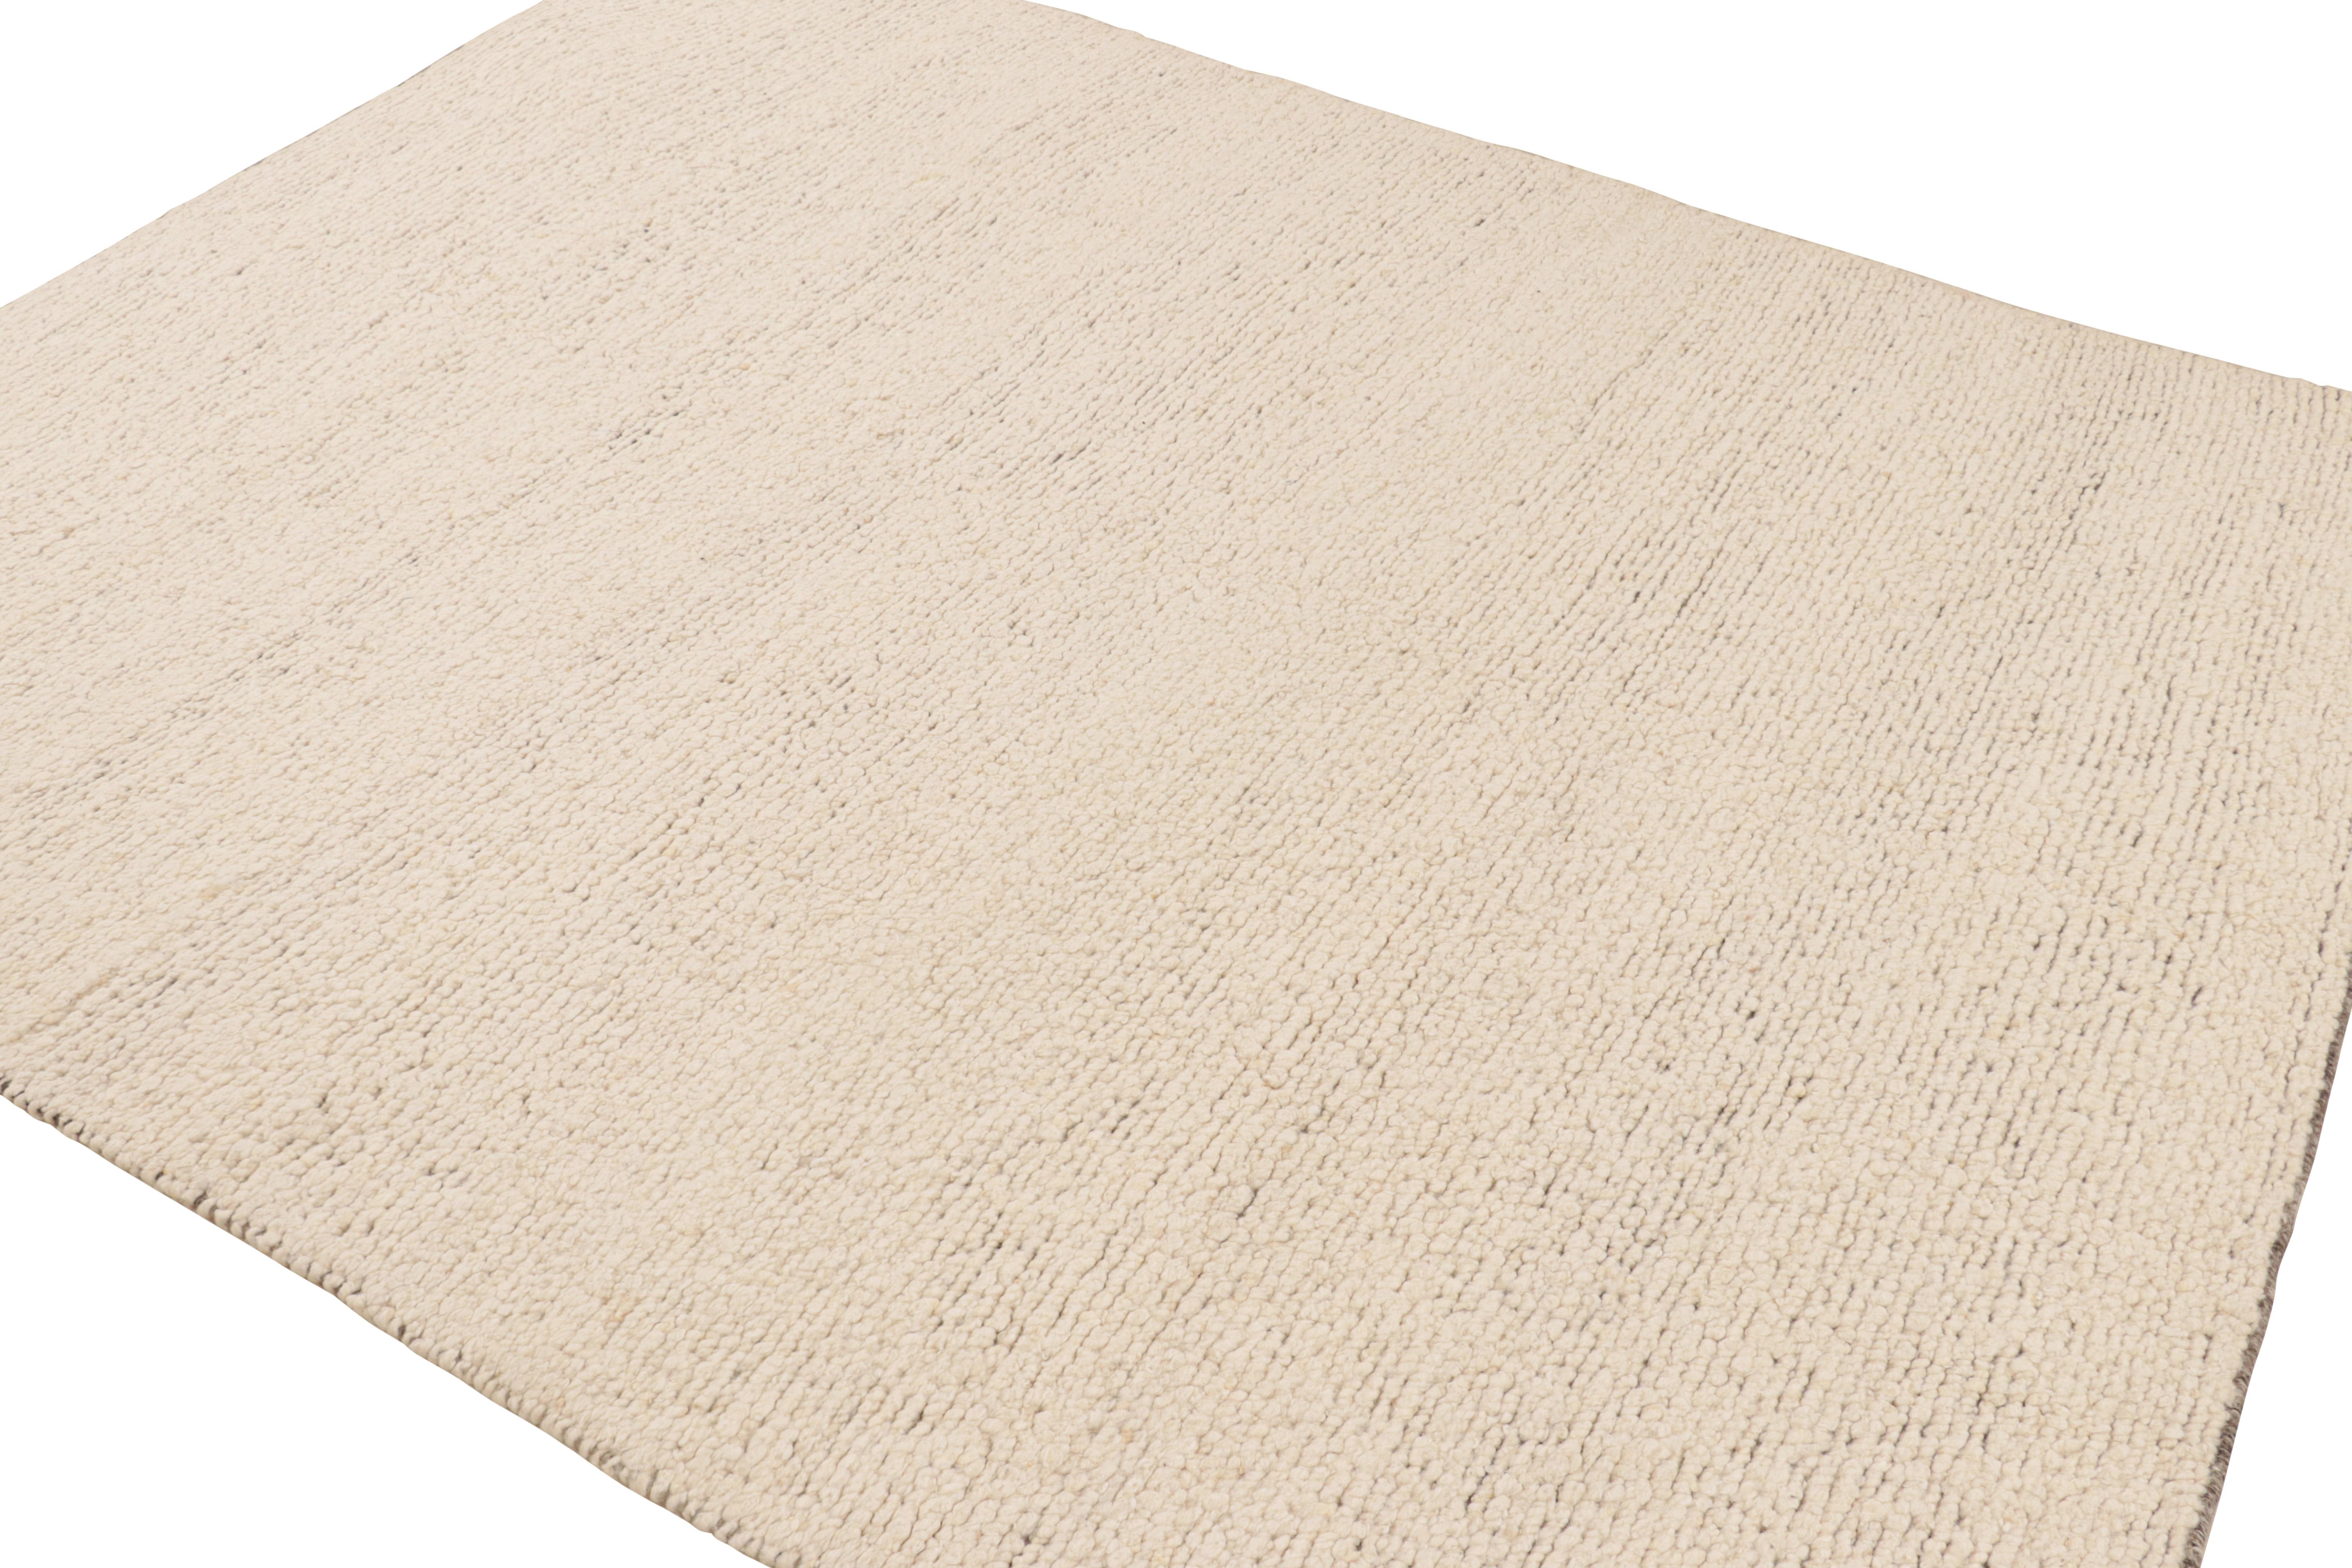 Hand-Woven Rug & Kilim’s Textural Kilim in Solid Cream and White Tones For Sale